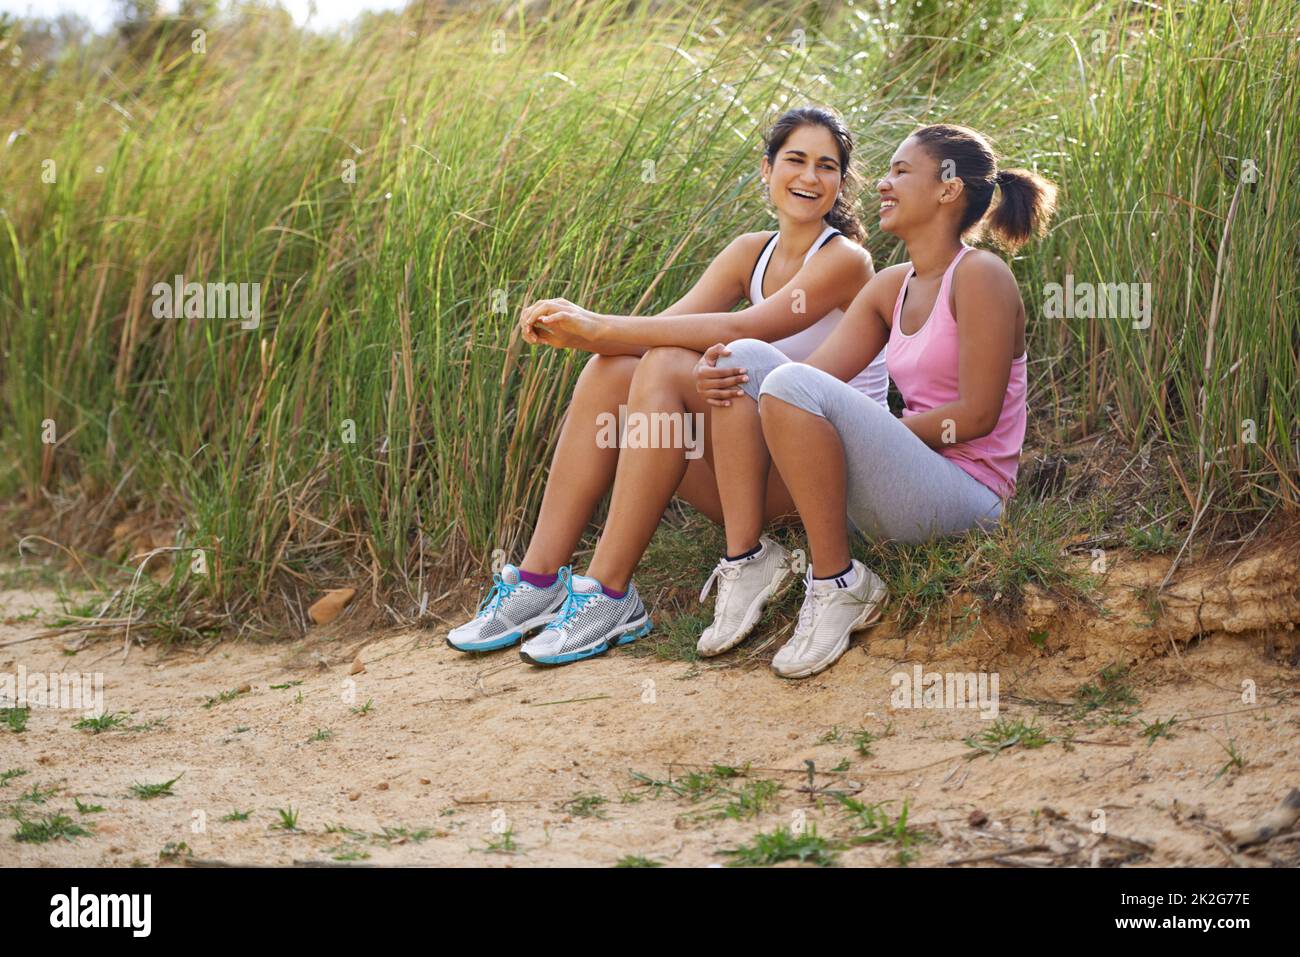 Sharing a joke between friends. Two friends sitting outside laughing together while wearing exercise clothes. Stock Photo